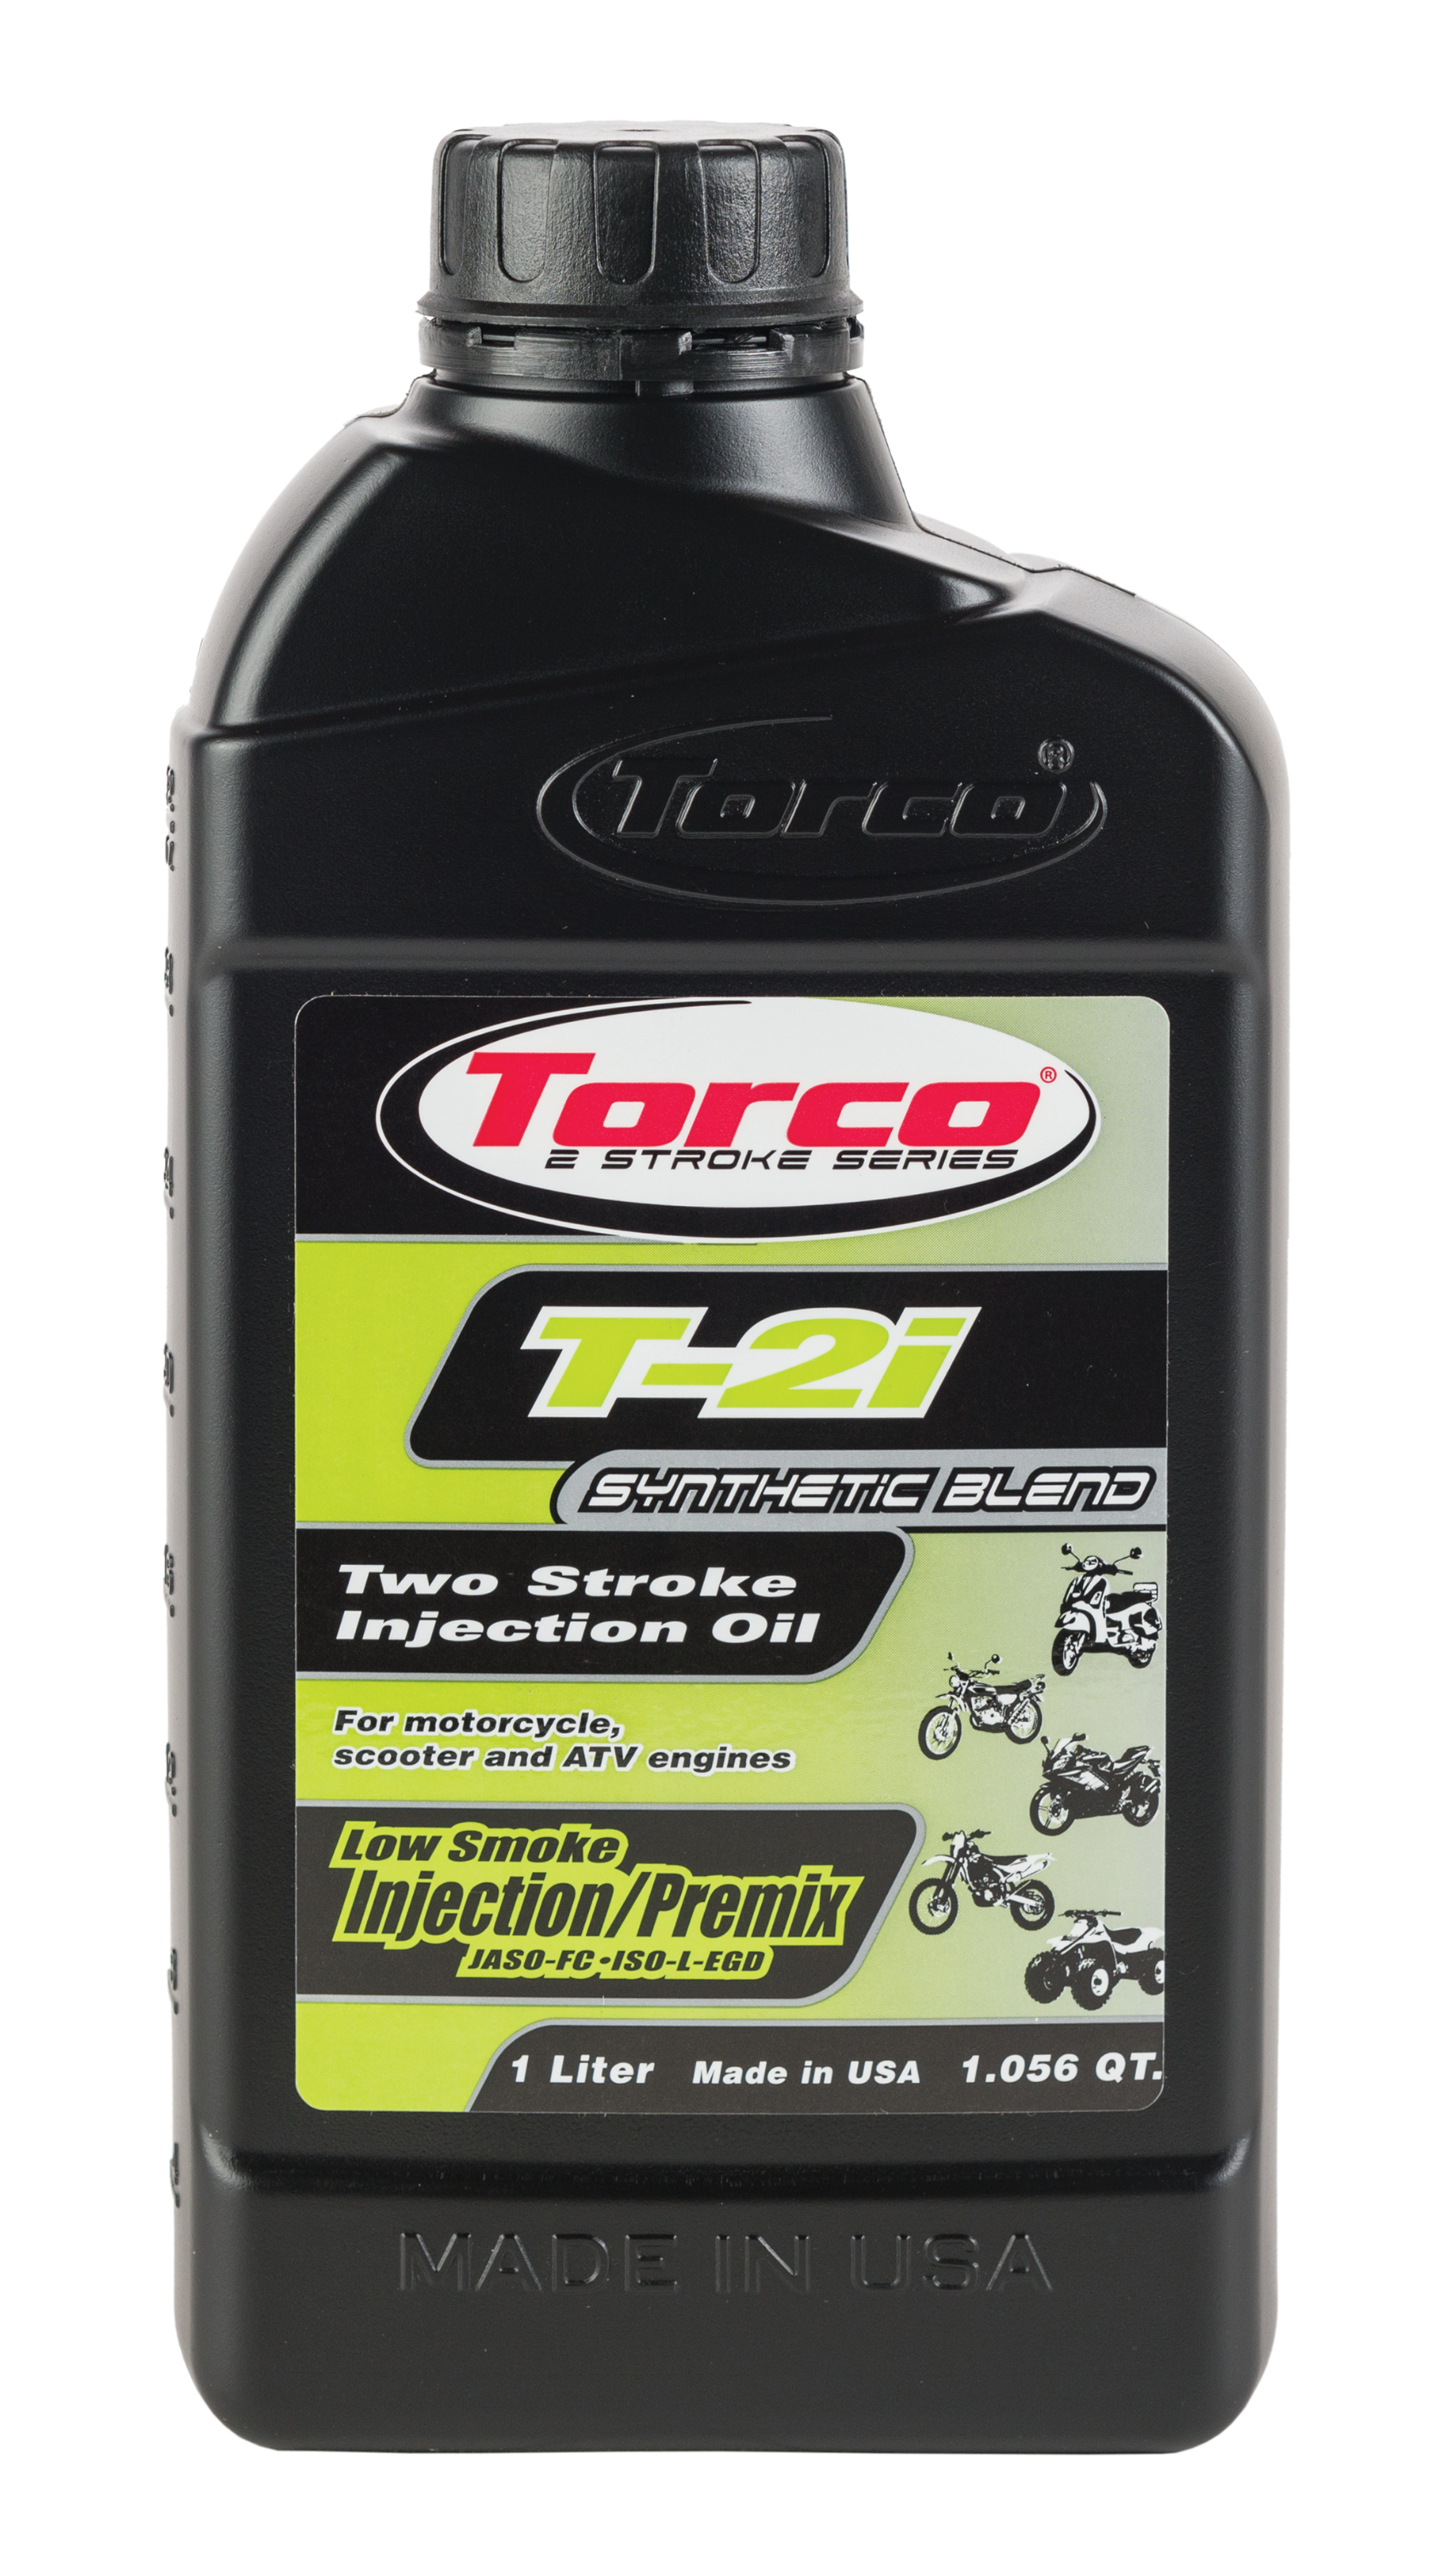 Torco - T-2i 2-stroke Injection Oil 1l - T920022CE